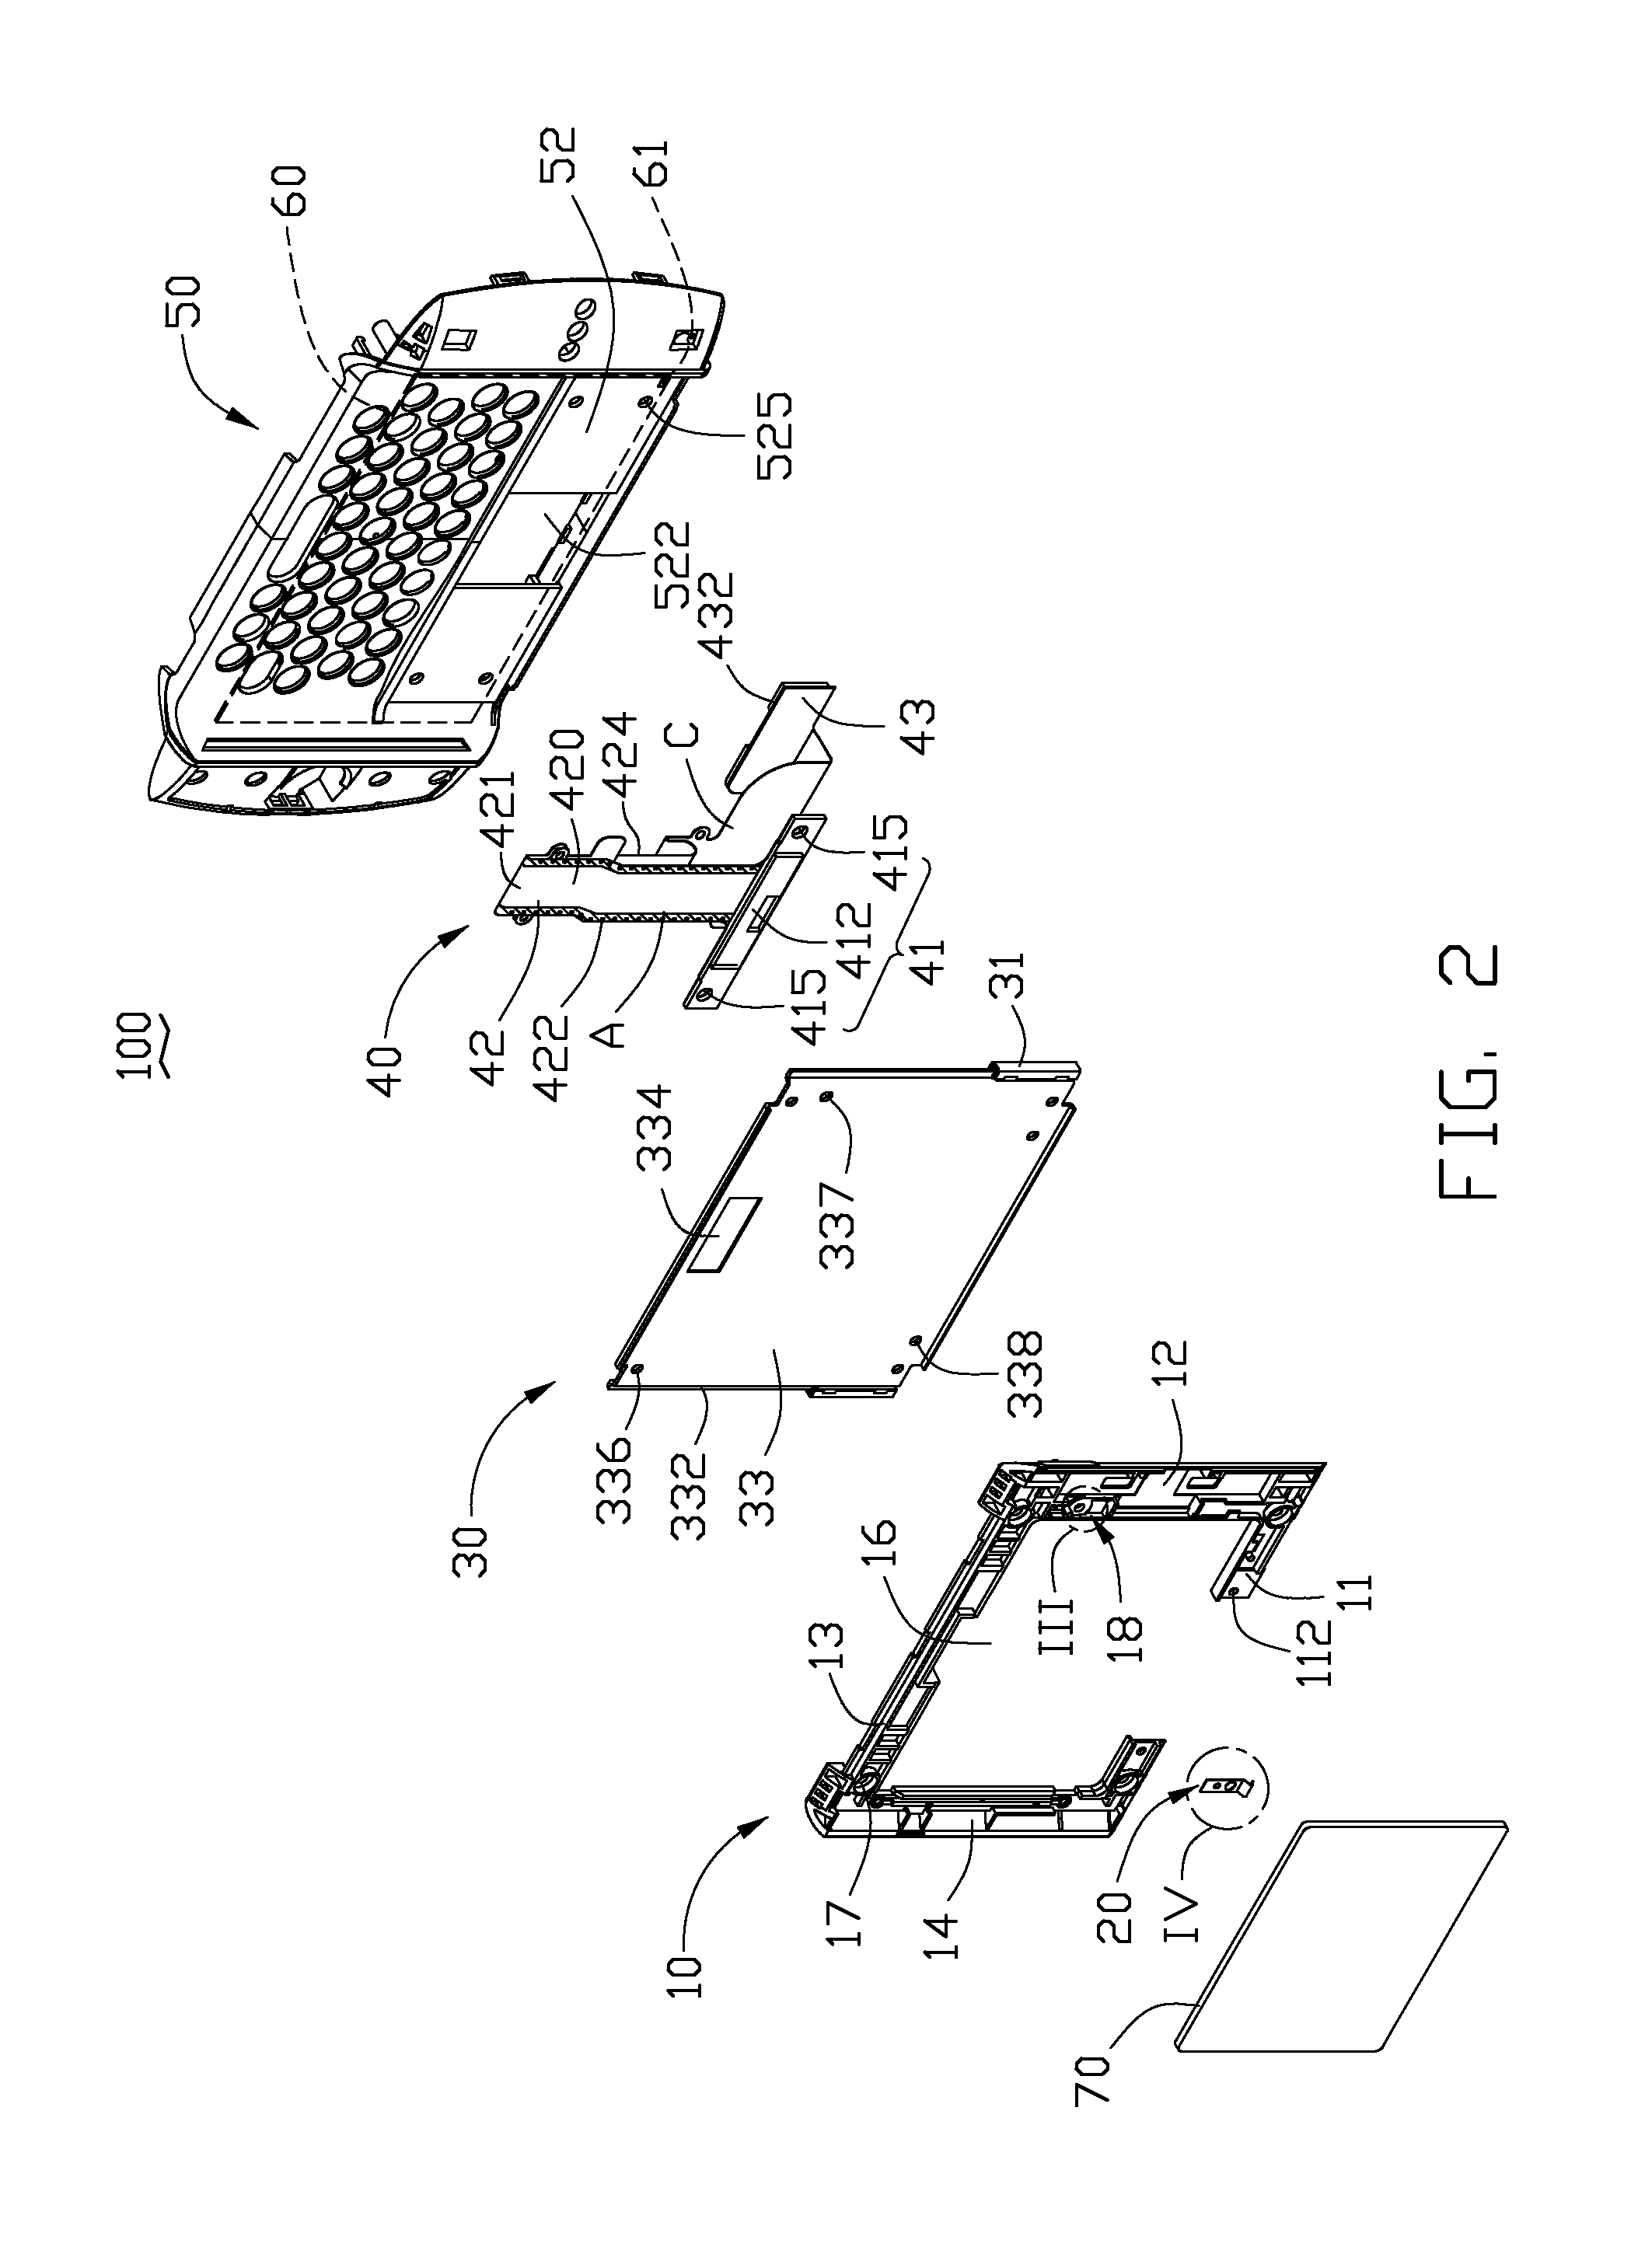 Grounding apparatus of portable electronic devices